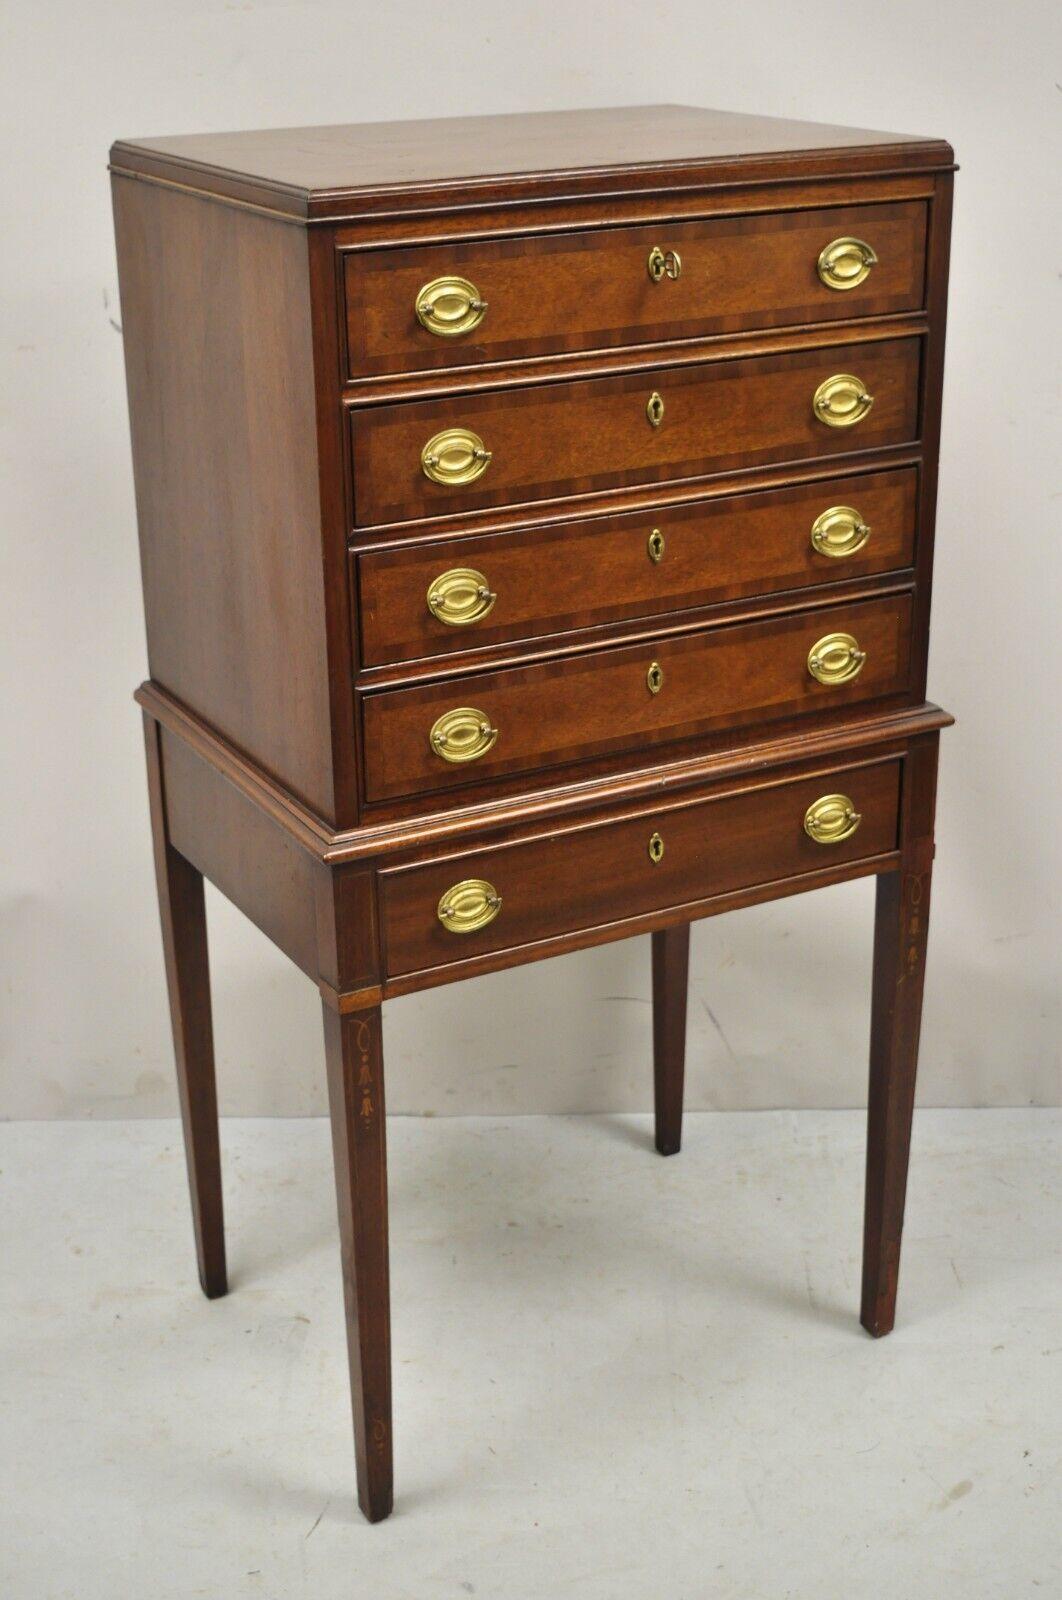 Council Craftsman Sheraton Style mahogany silverware chest with Inlay. Item features pinwheel inlay to legs, banded drawer fronts, working lock and key, 5 dovetailed drawers, quality American craftsman. Circa Mid to Late 20th Century. Measurements: